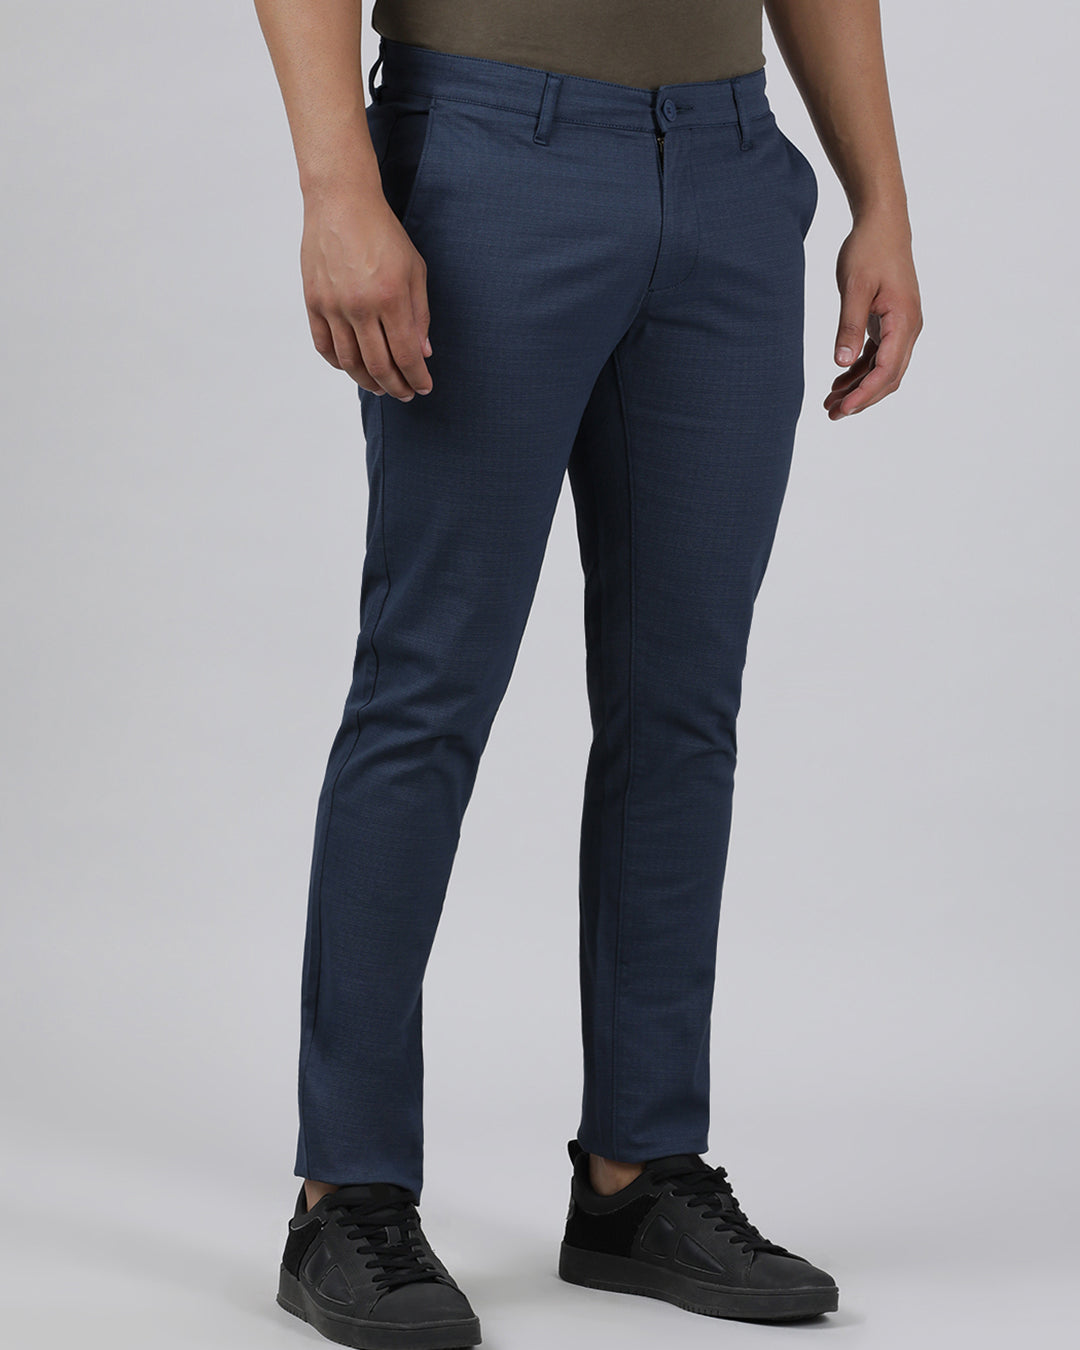 Casual Trim Fit Printed Navy Trousers for Men